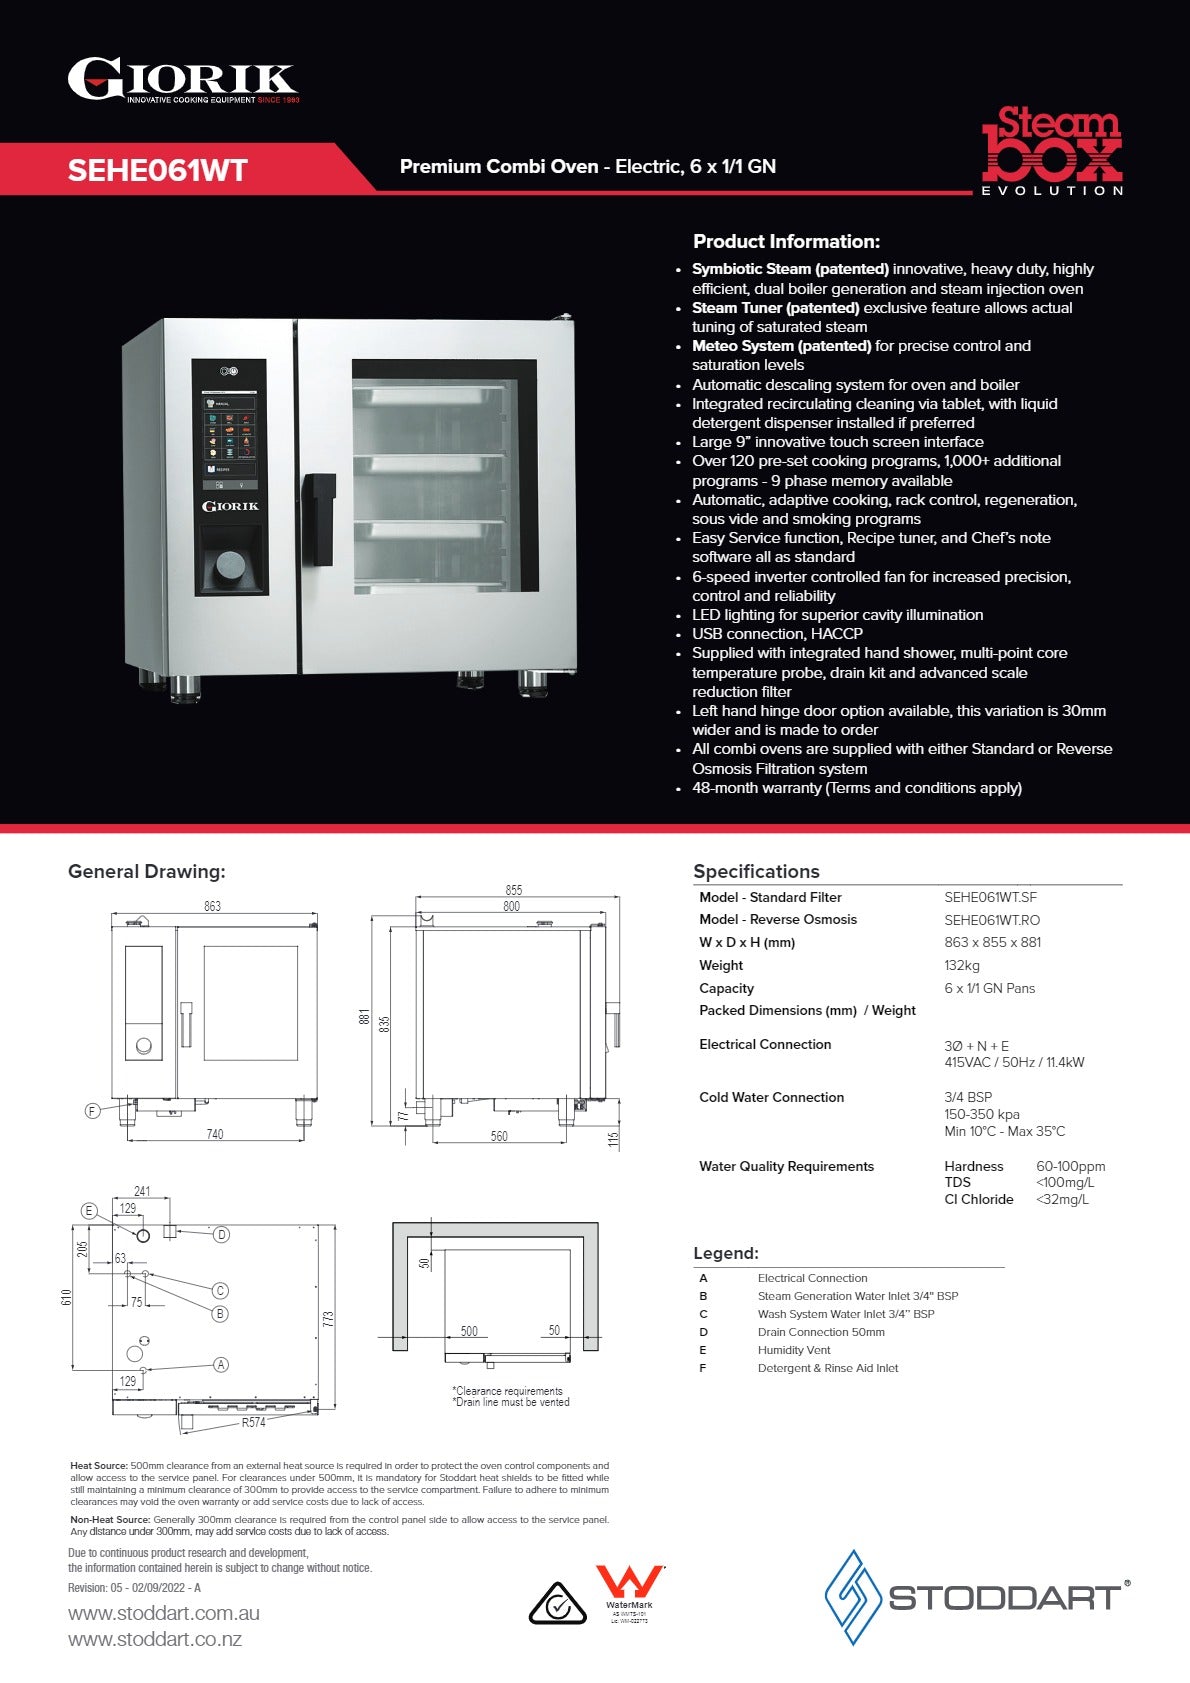 Thumbnail - Giorik Steambox Evolution SEHE061WT.SF.H - Combi Oven With Hood